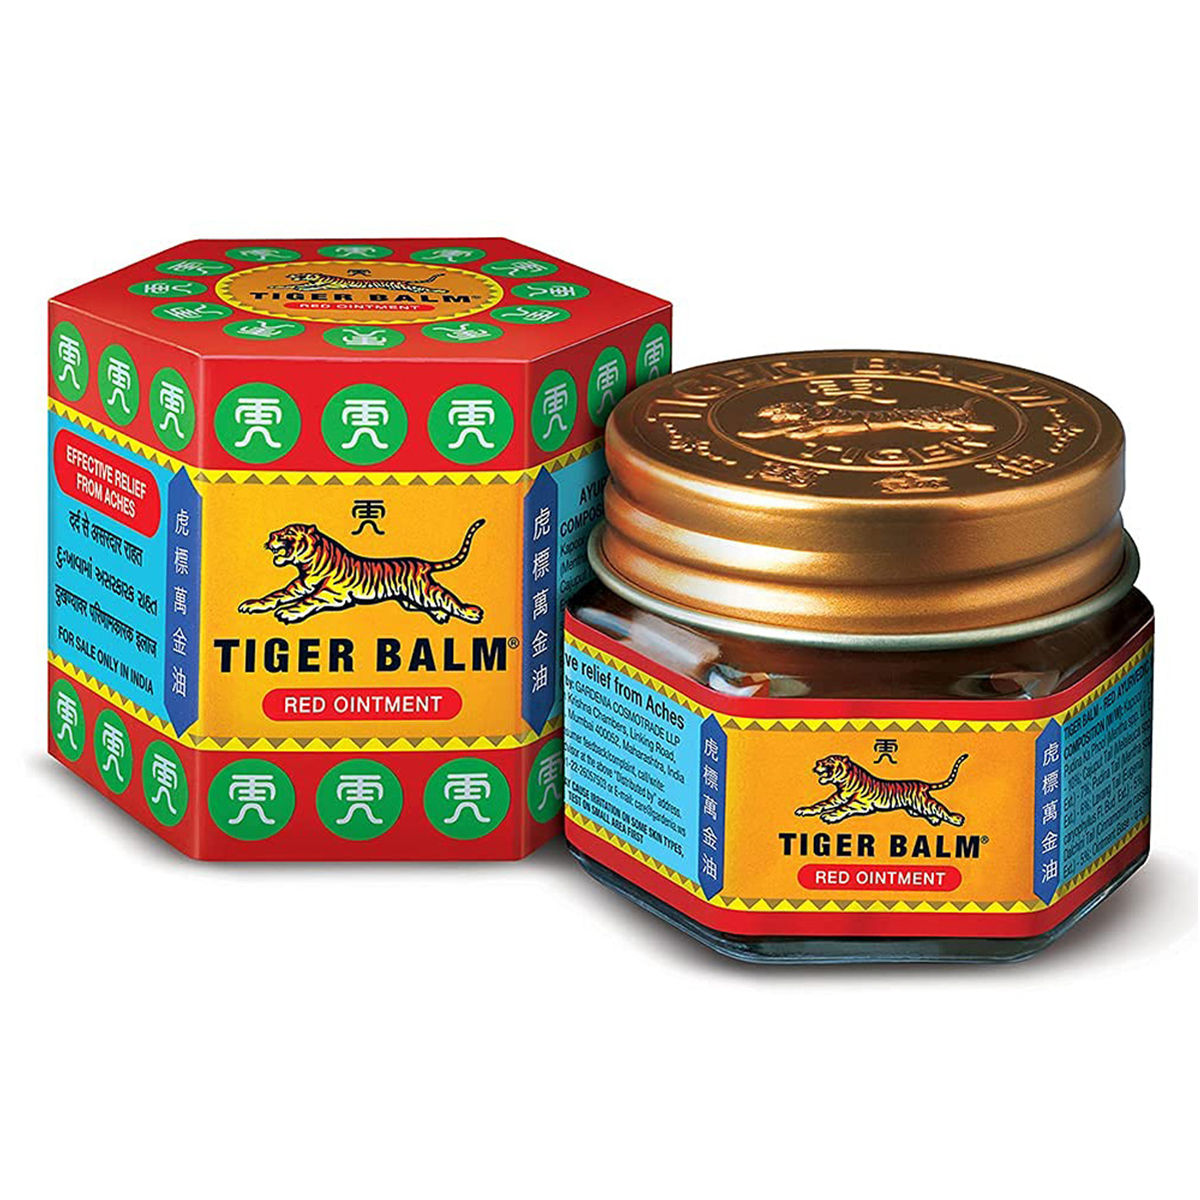 Buy Tiger Balm Red Ointment, 8 gm Online